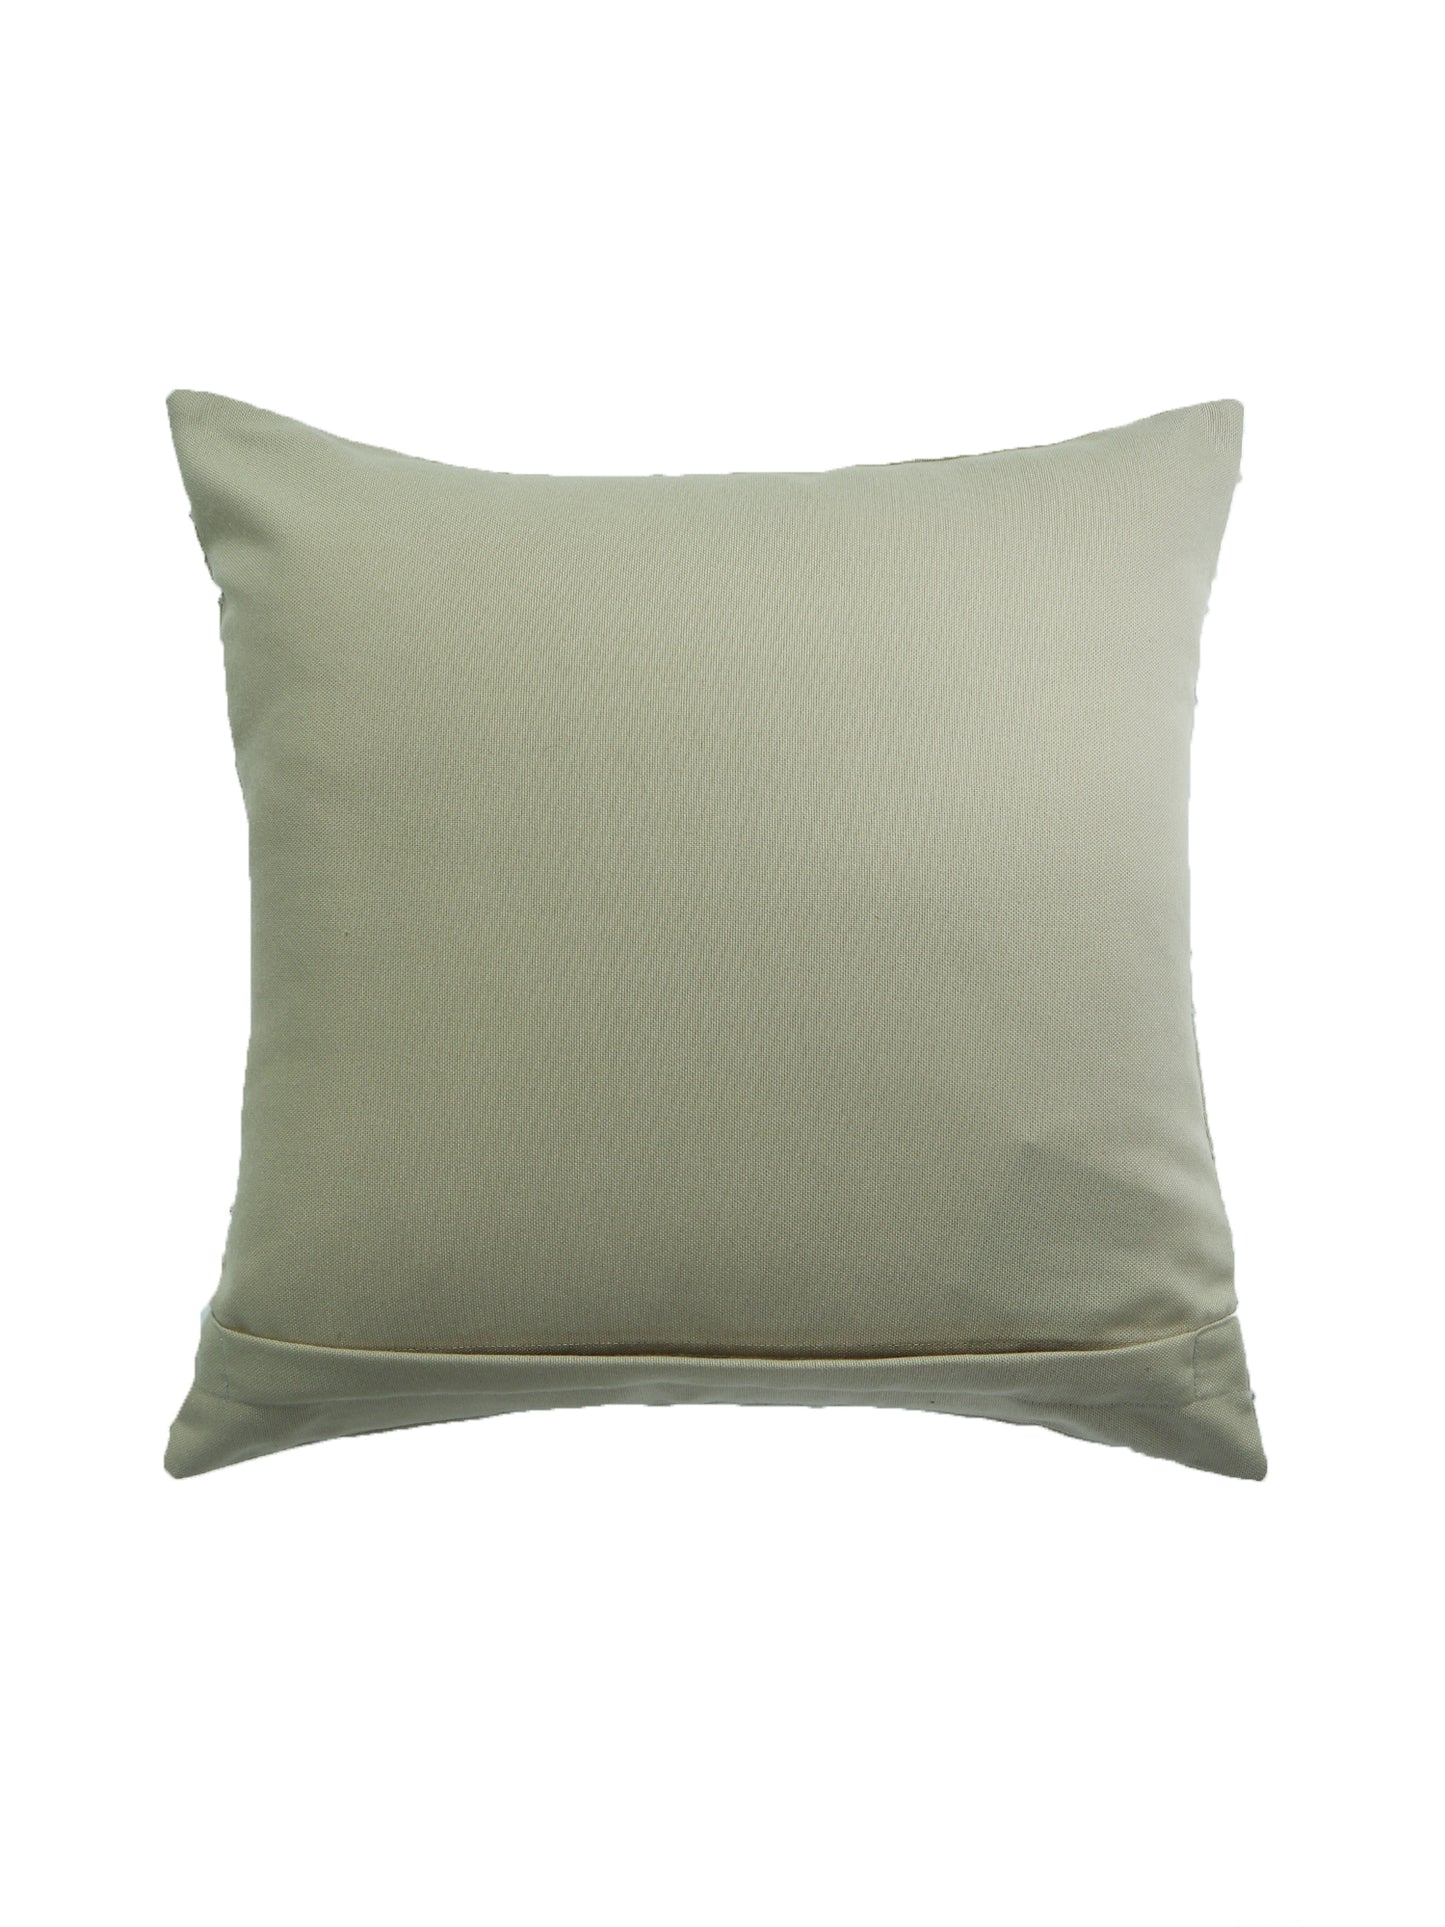 Hand embroidered Cushion Cover Beige - 16" X 16"